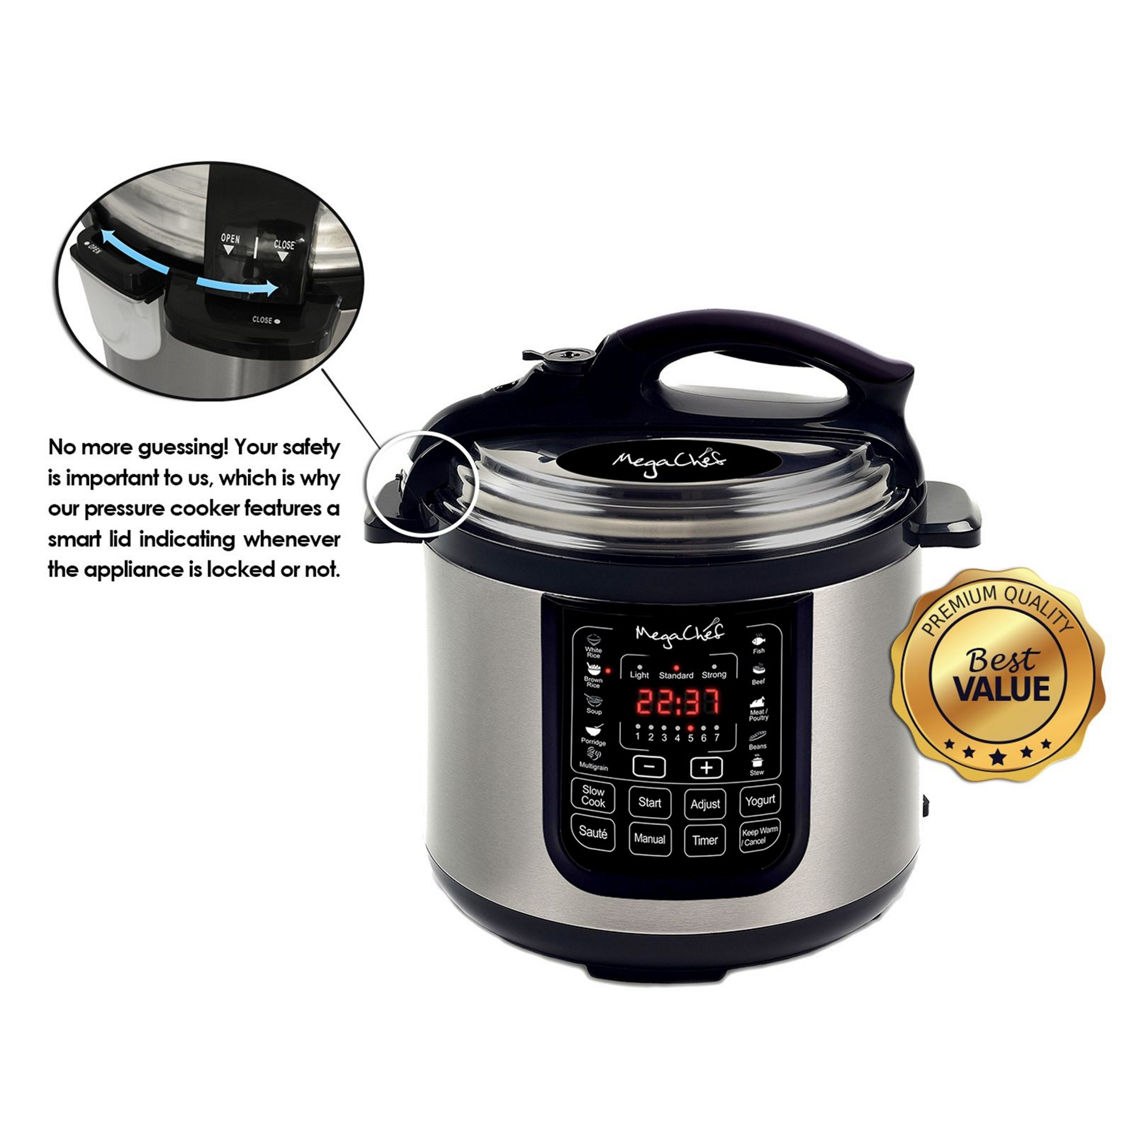 Megachef 8 Quart Digital Pressure Cooker with 13 Pre-set Multi Function Features - Image 5 of 5